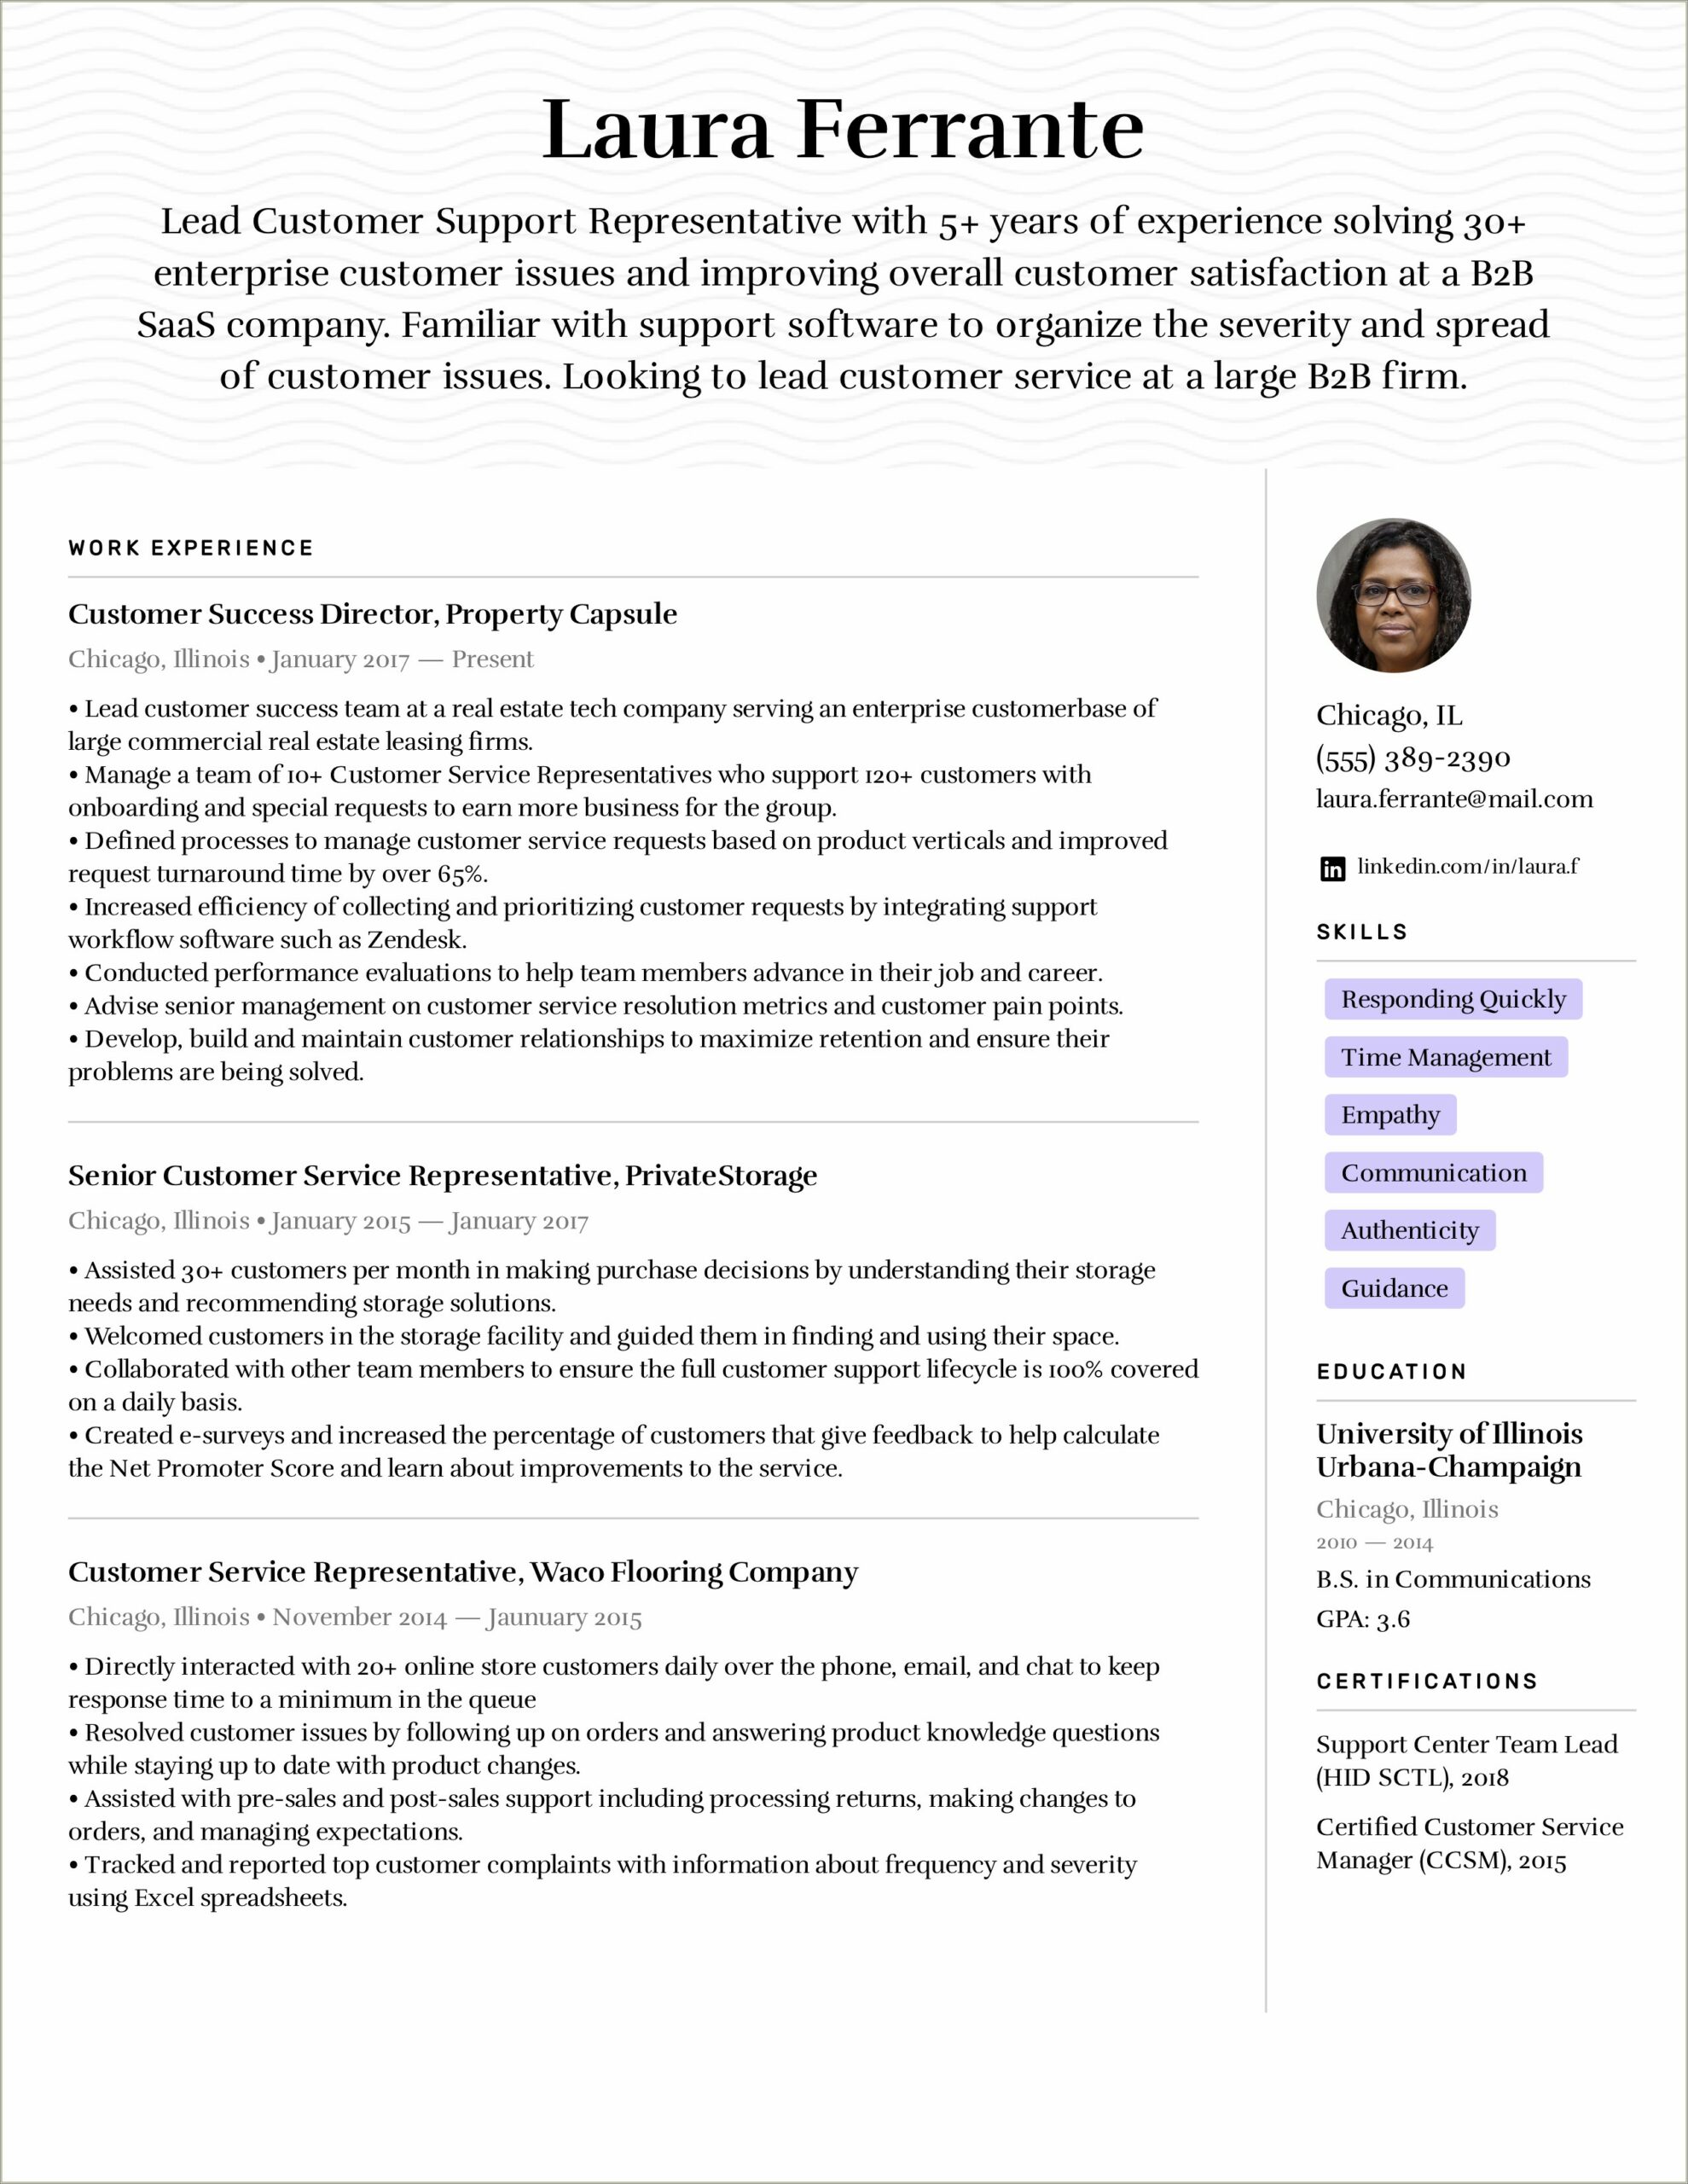 Client Professtional And Technical Skills On Resume